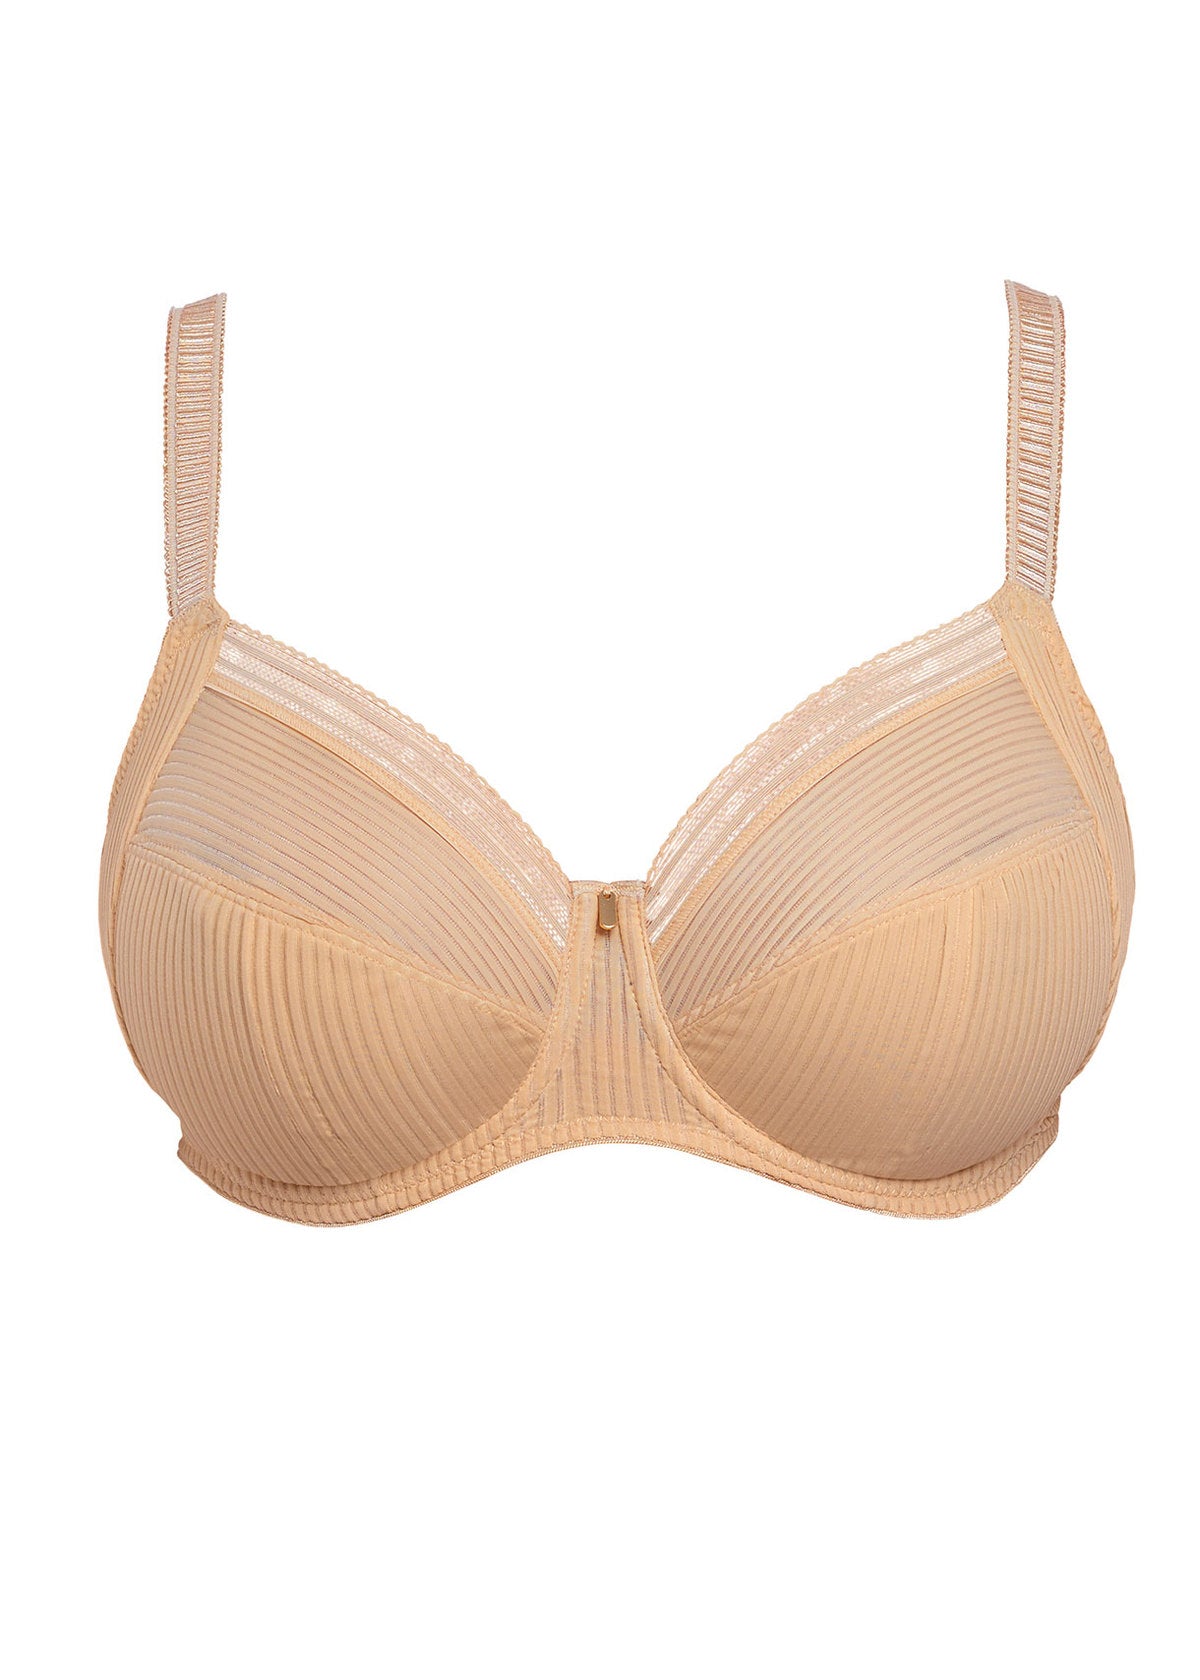 Fantasie Fusion Underwired Full Cup Side Support Bra - Sapphire - Curvy